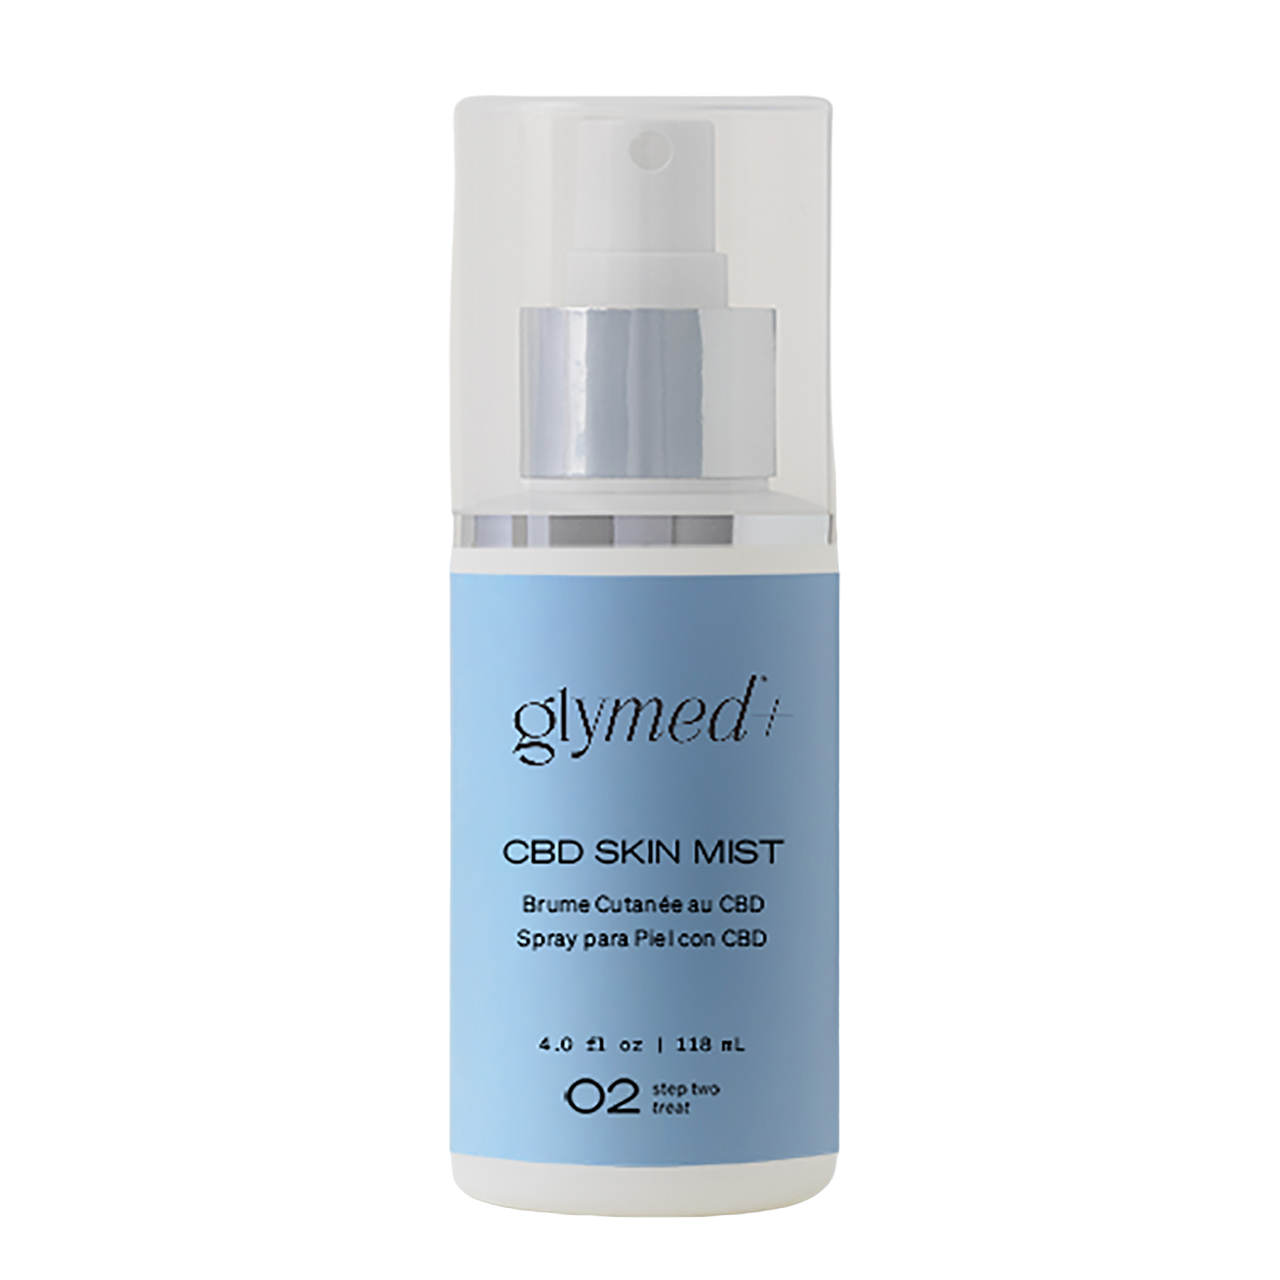 What is the difference between this and the Glymed skin recovery mist?